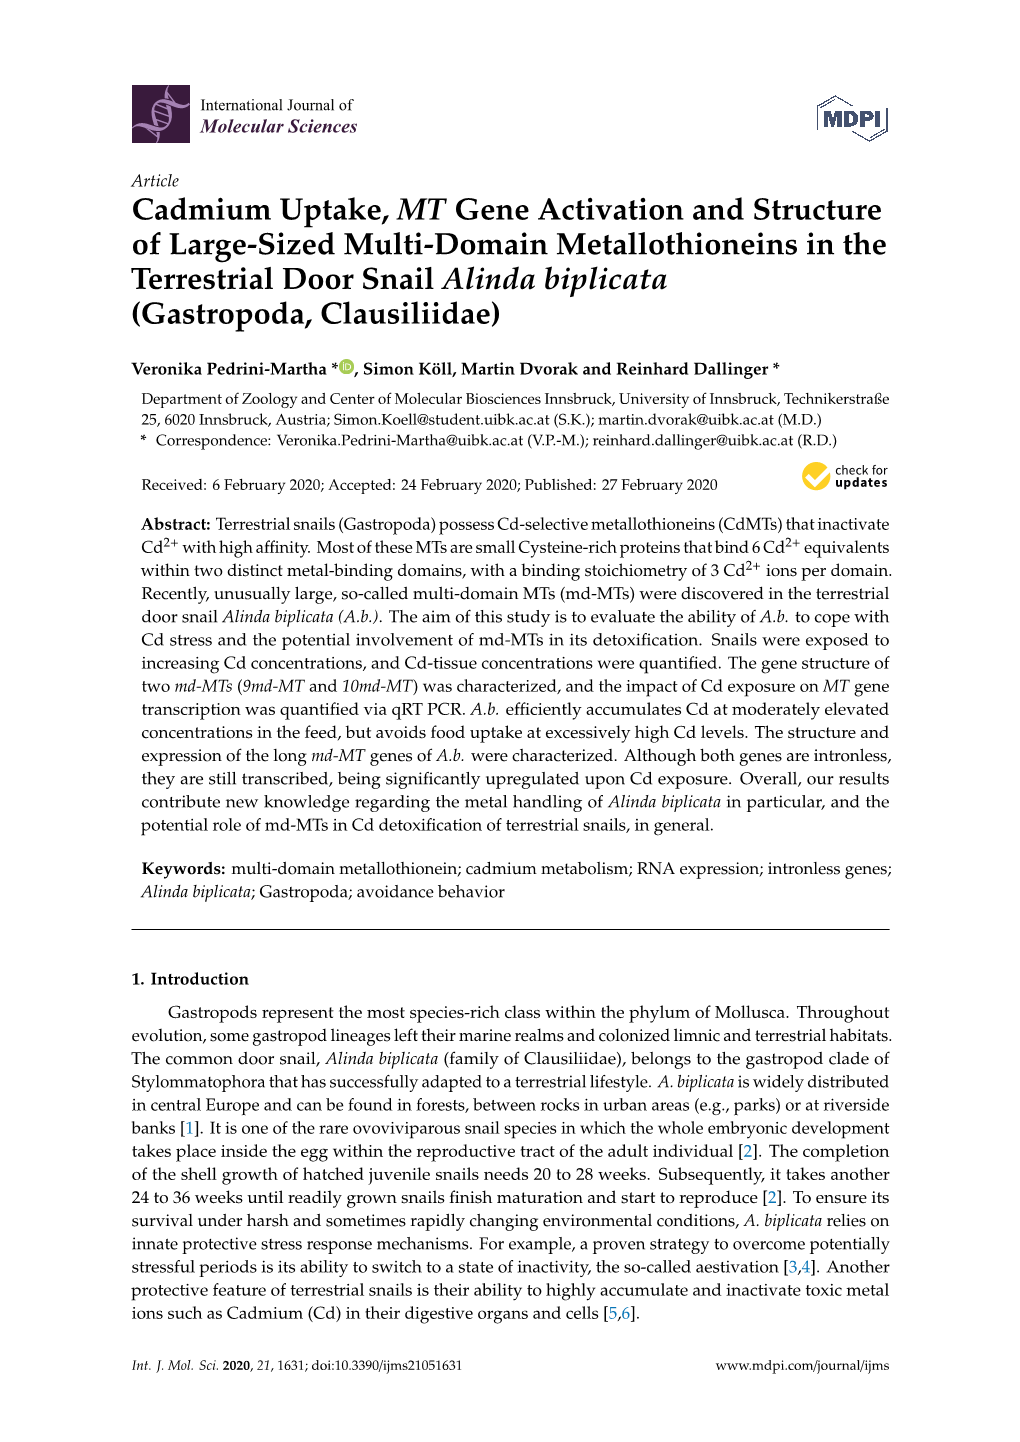 Cadmium Uptake, MT Gene Activation and Structure of Large-Sized Multi